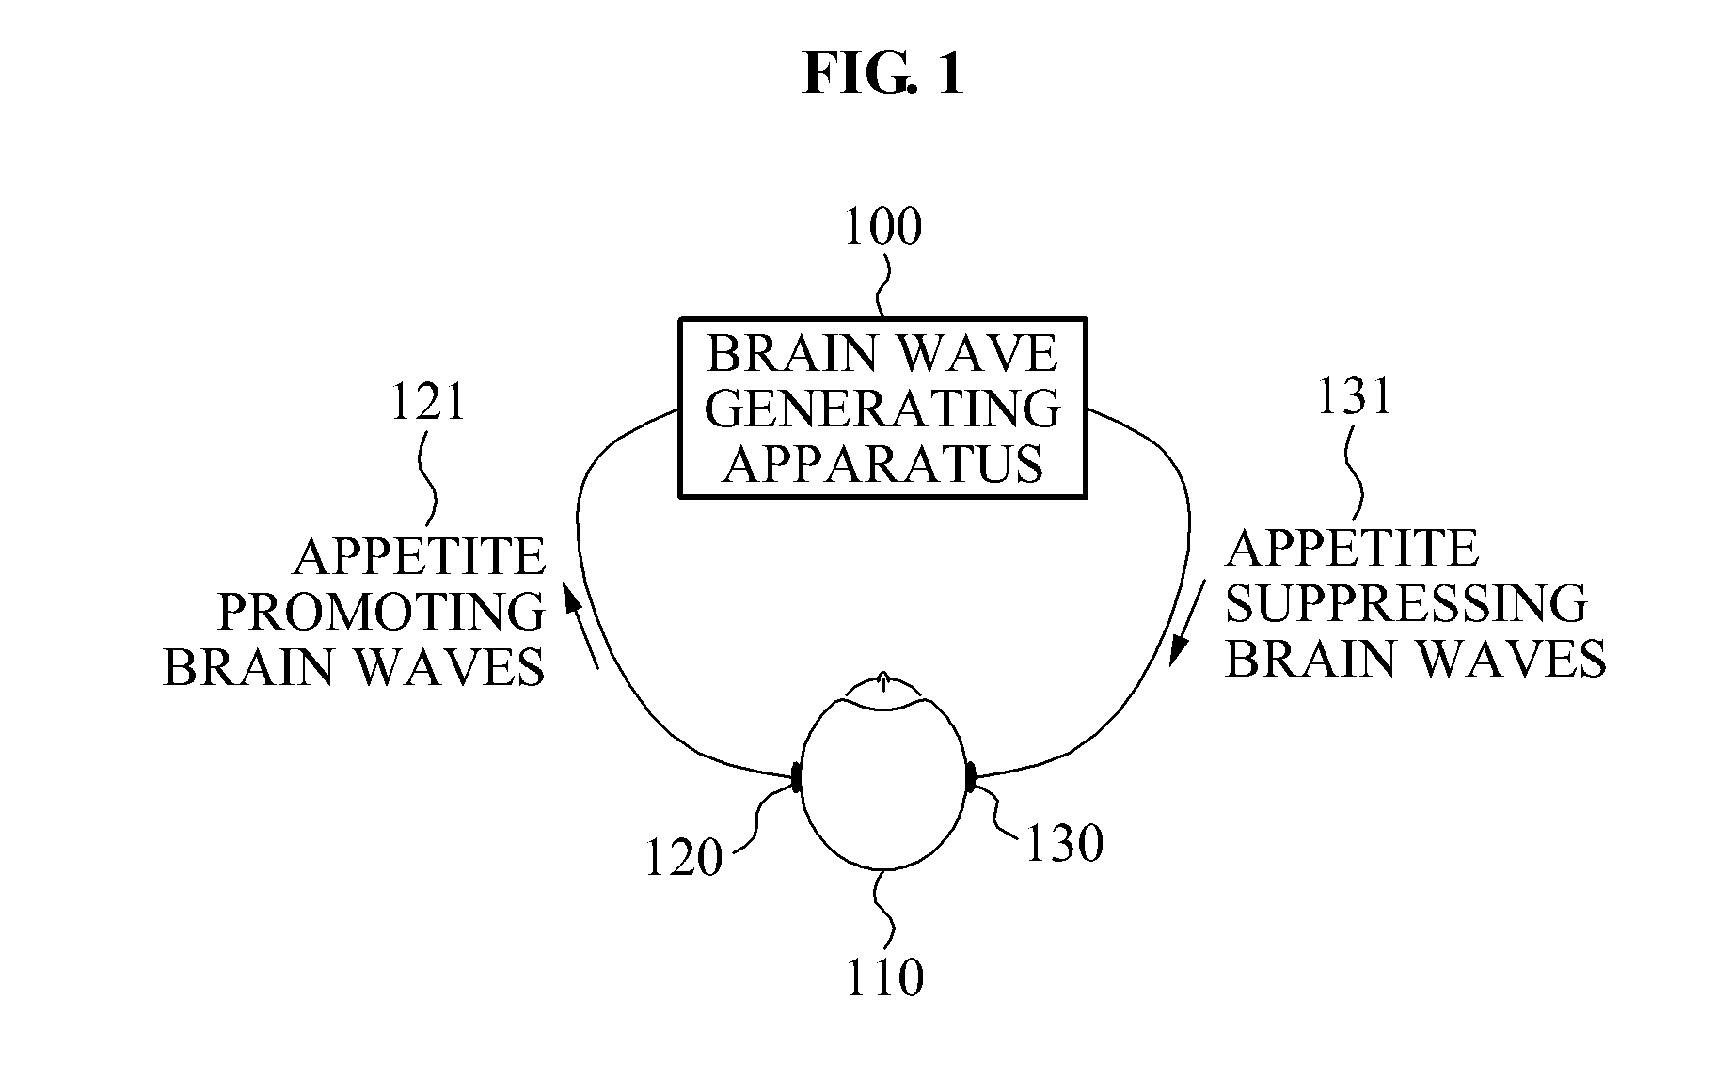 Apparatus and method for generating brain waves for suppressing appetite while dieting